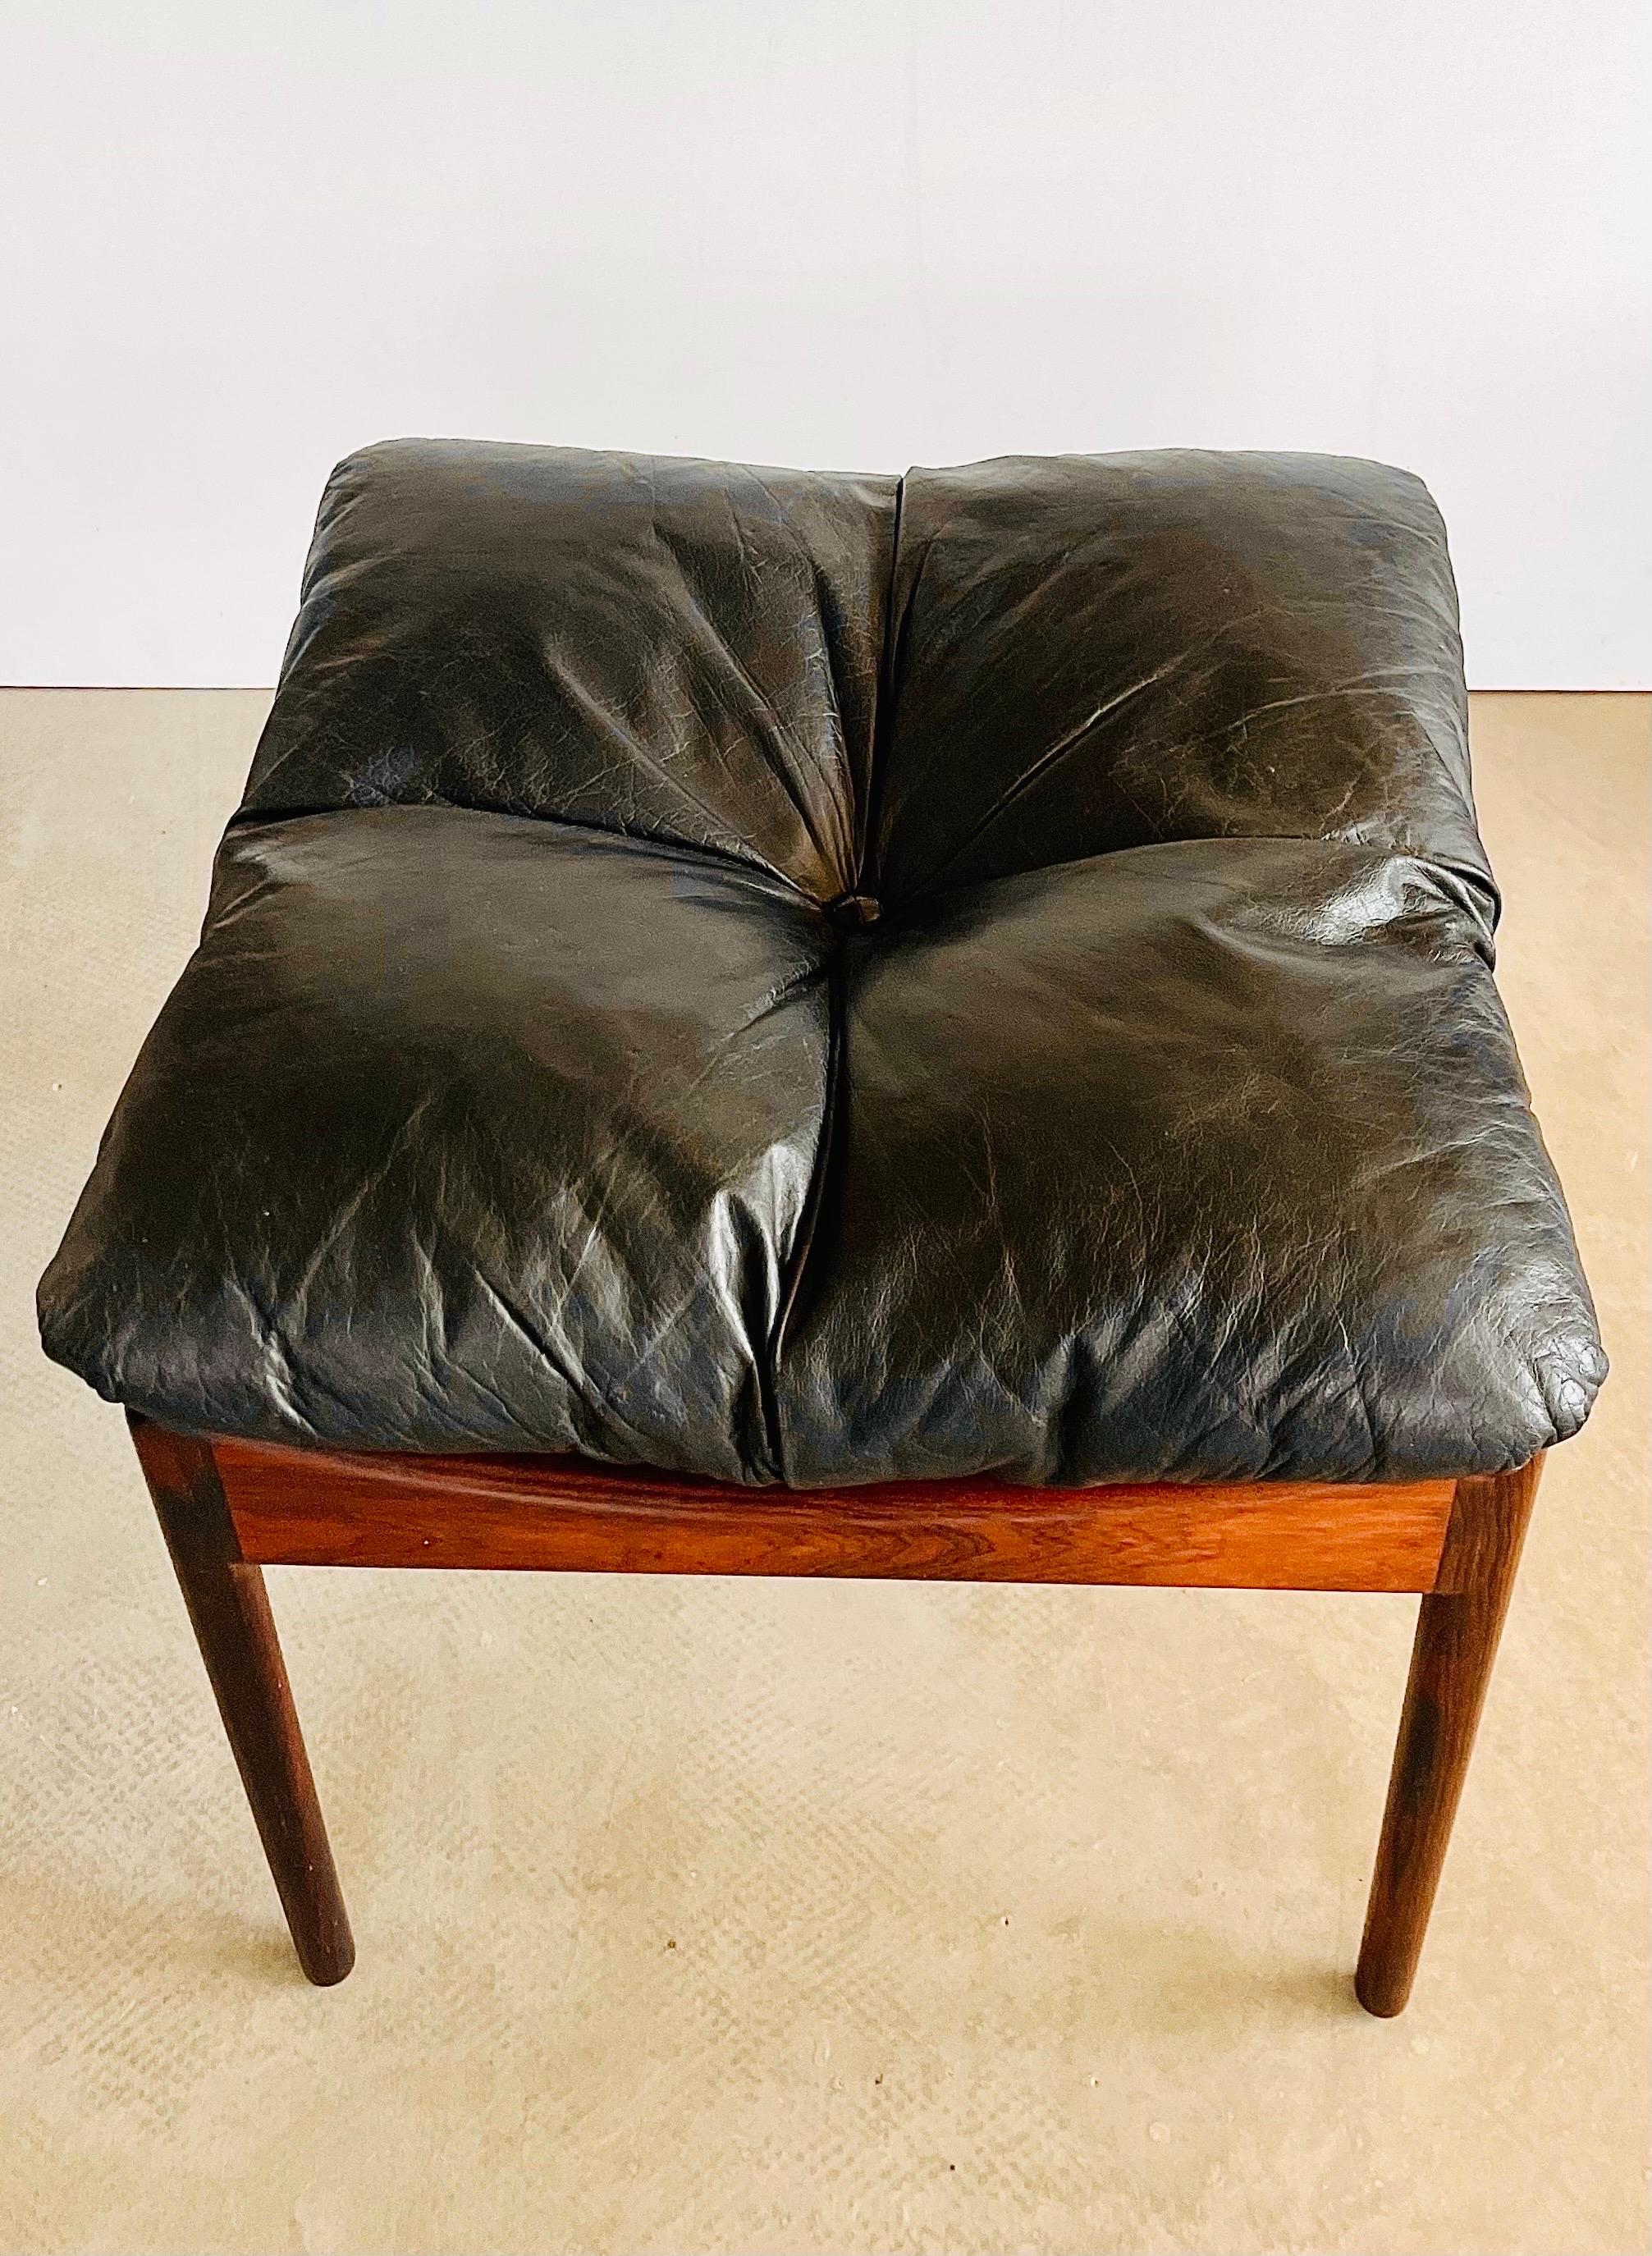 Kristian Solmer Vedel Leather Hocker Ottoman Pouf, Danish Design In Good Condition For Sale In Amsterdam, NL